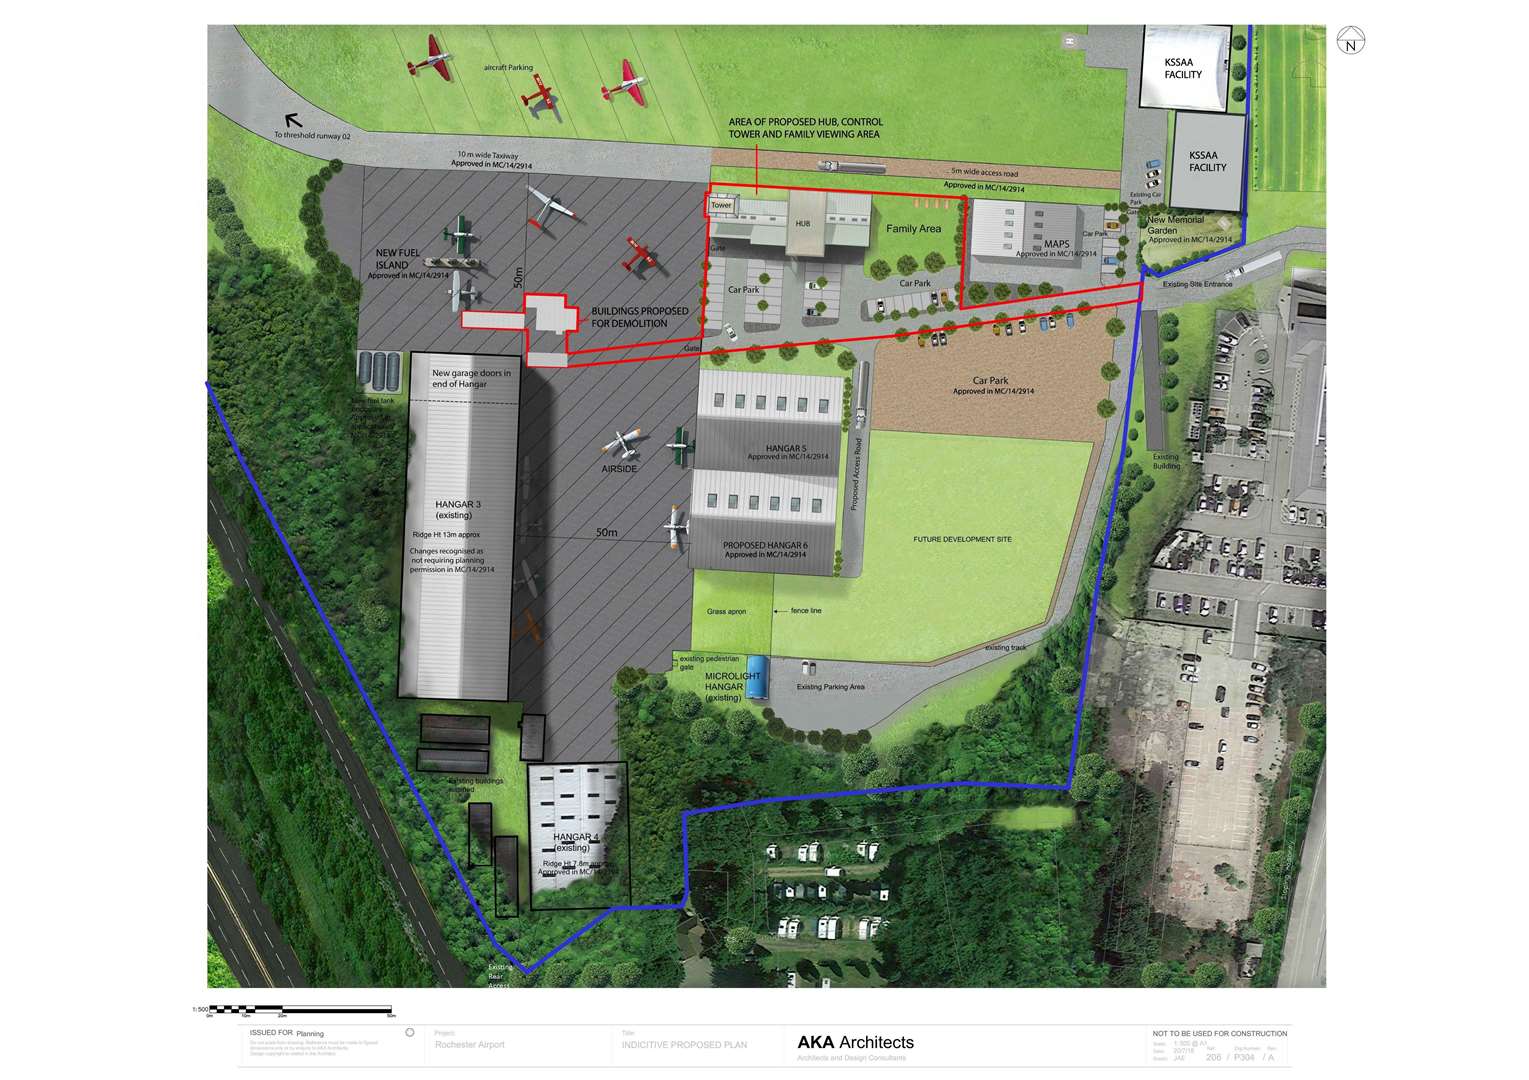 The Rochester Airport plans